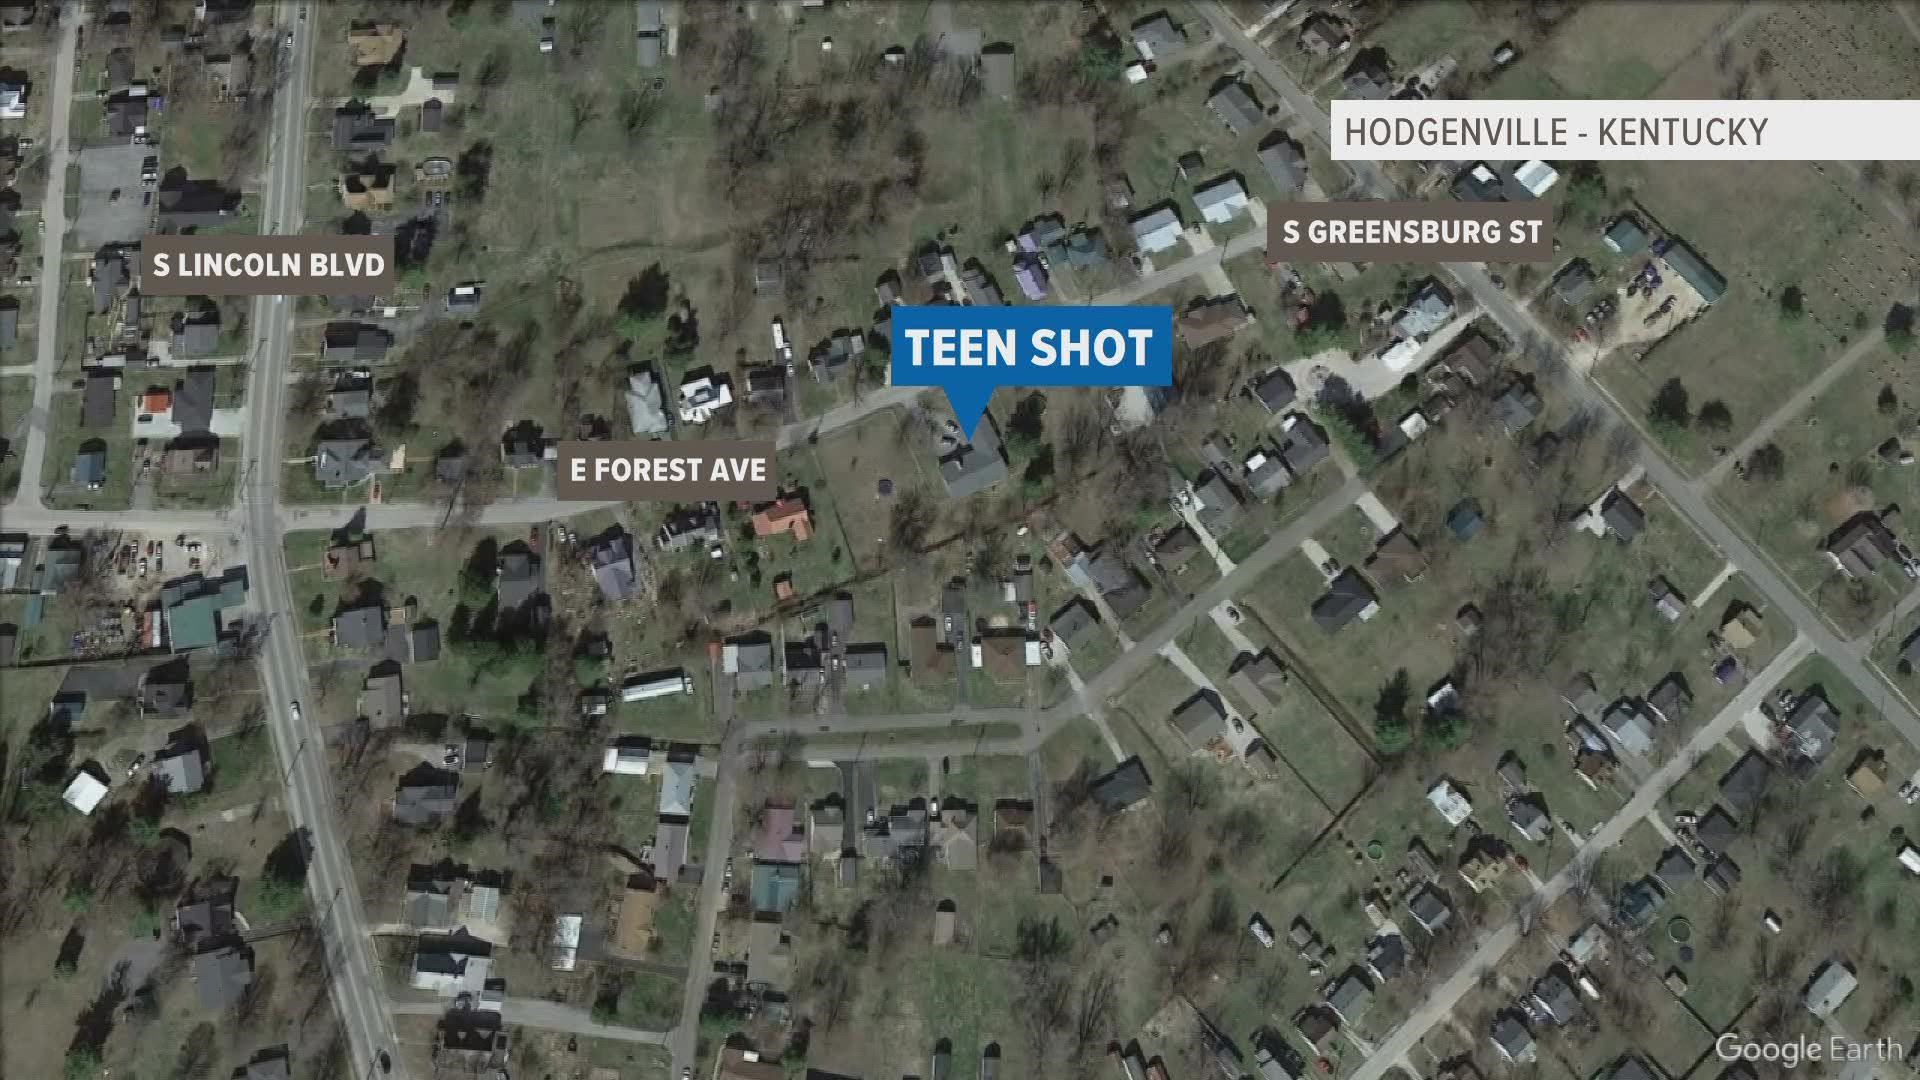 KSP say a 17-year-old boy and a 15-year-old got into a fight and someone shot the 17-year-old.